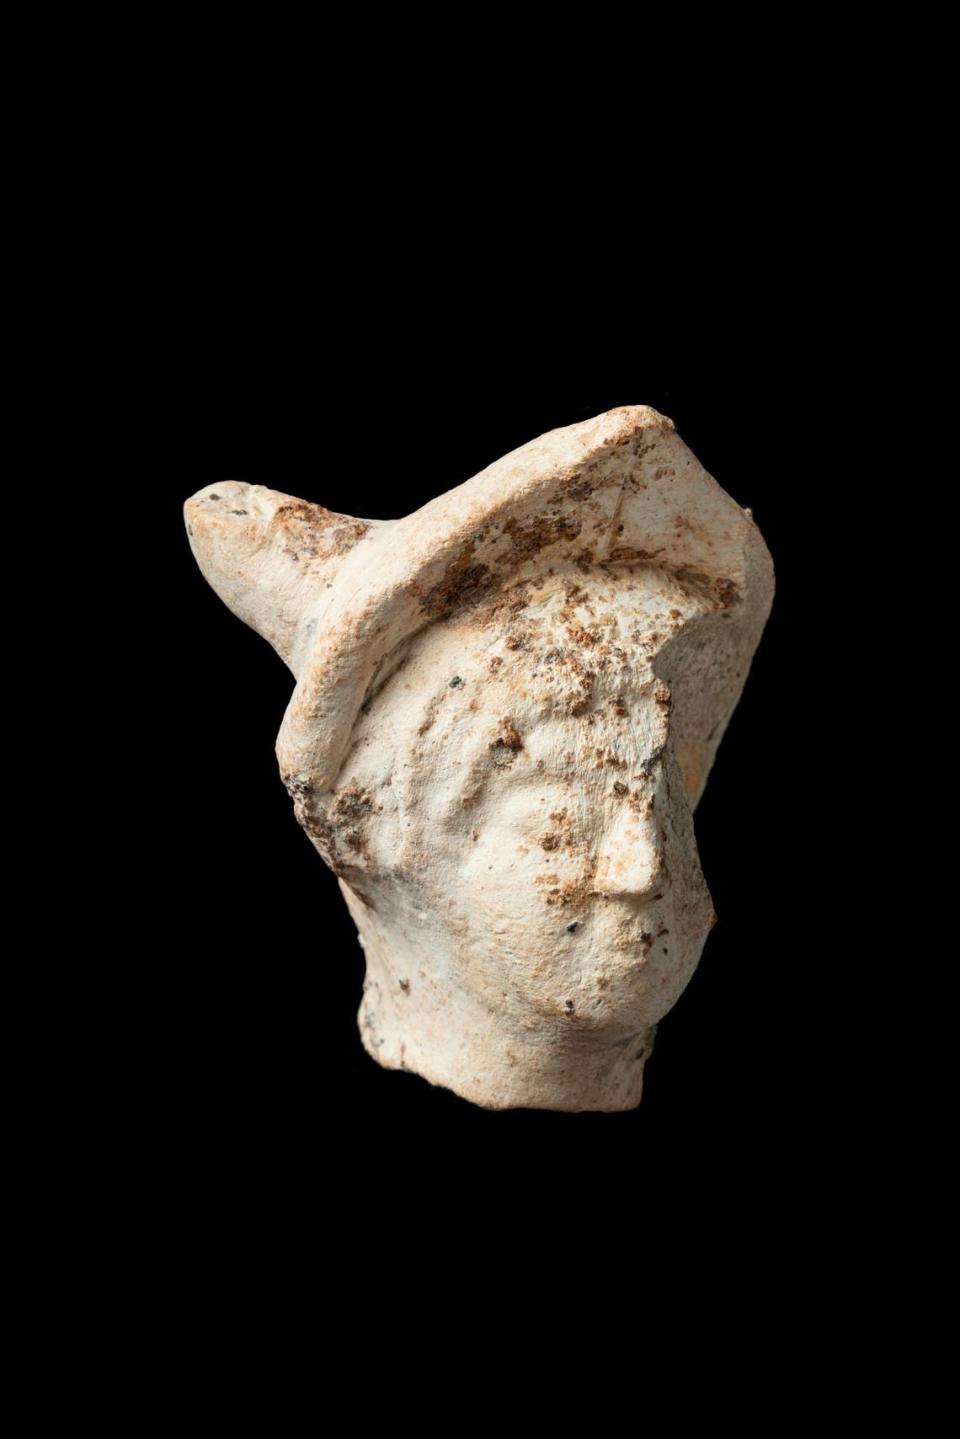 The ancient Roman figurine depicting the head of Mercury found at Smallhythe. Photo from James Dobson and National Trust